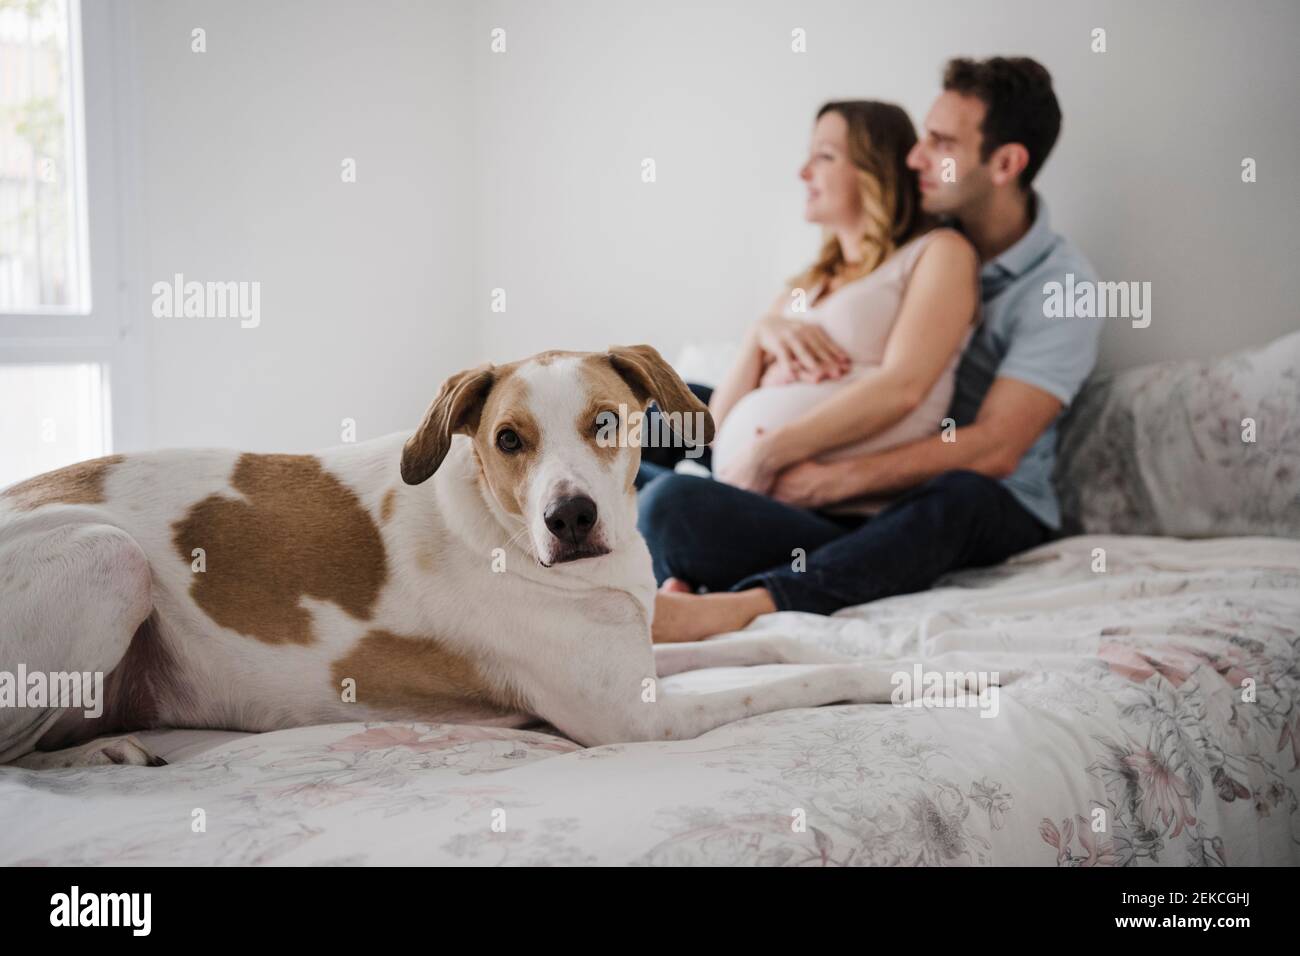 Dog lying on bed while loving couple sitting in background at home Stock Photo